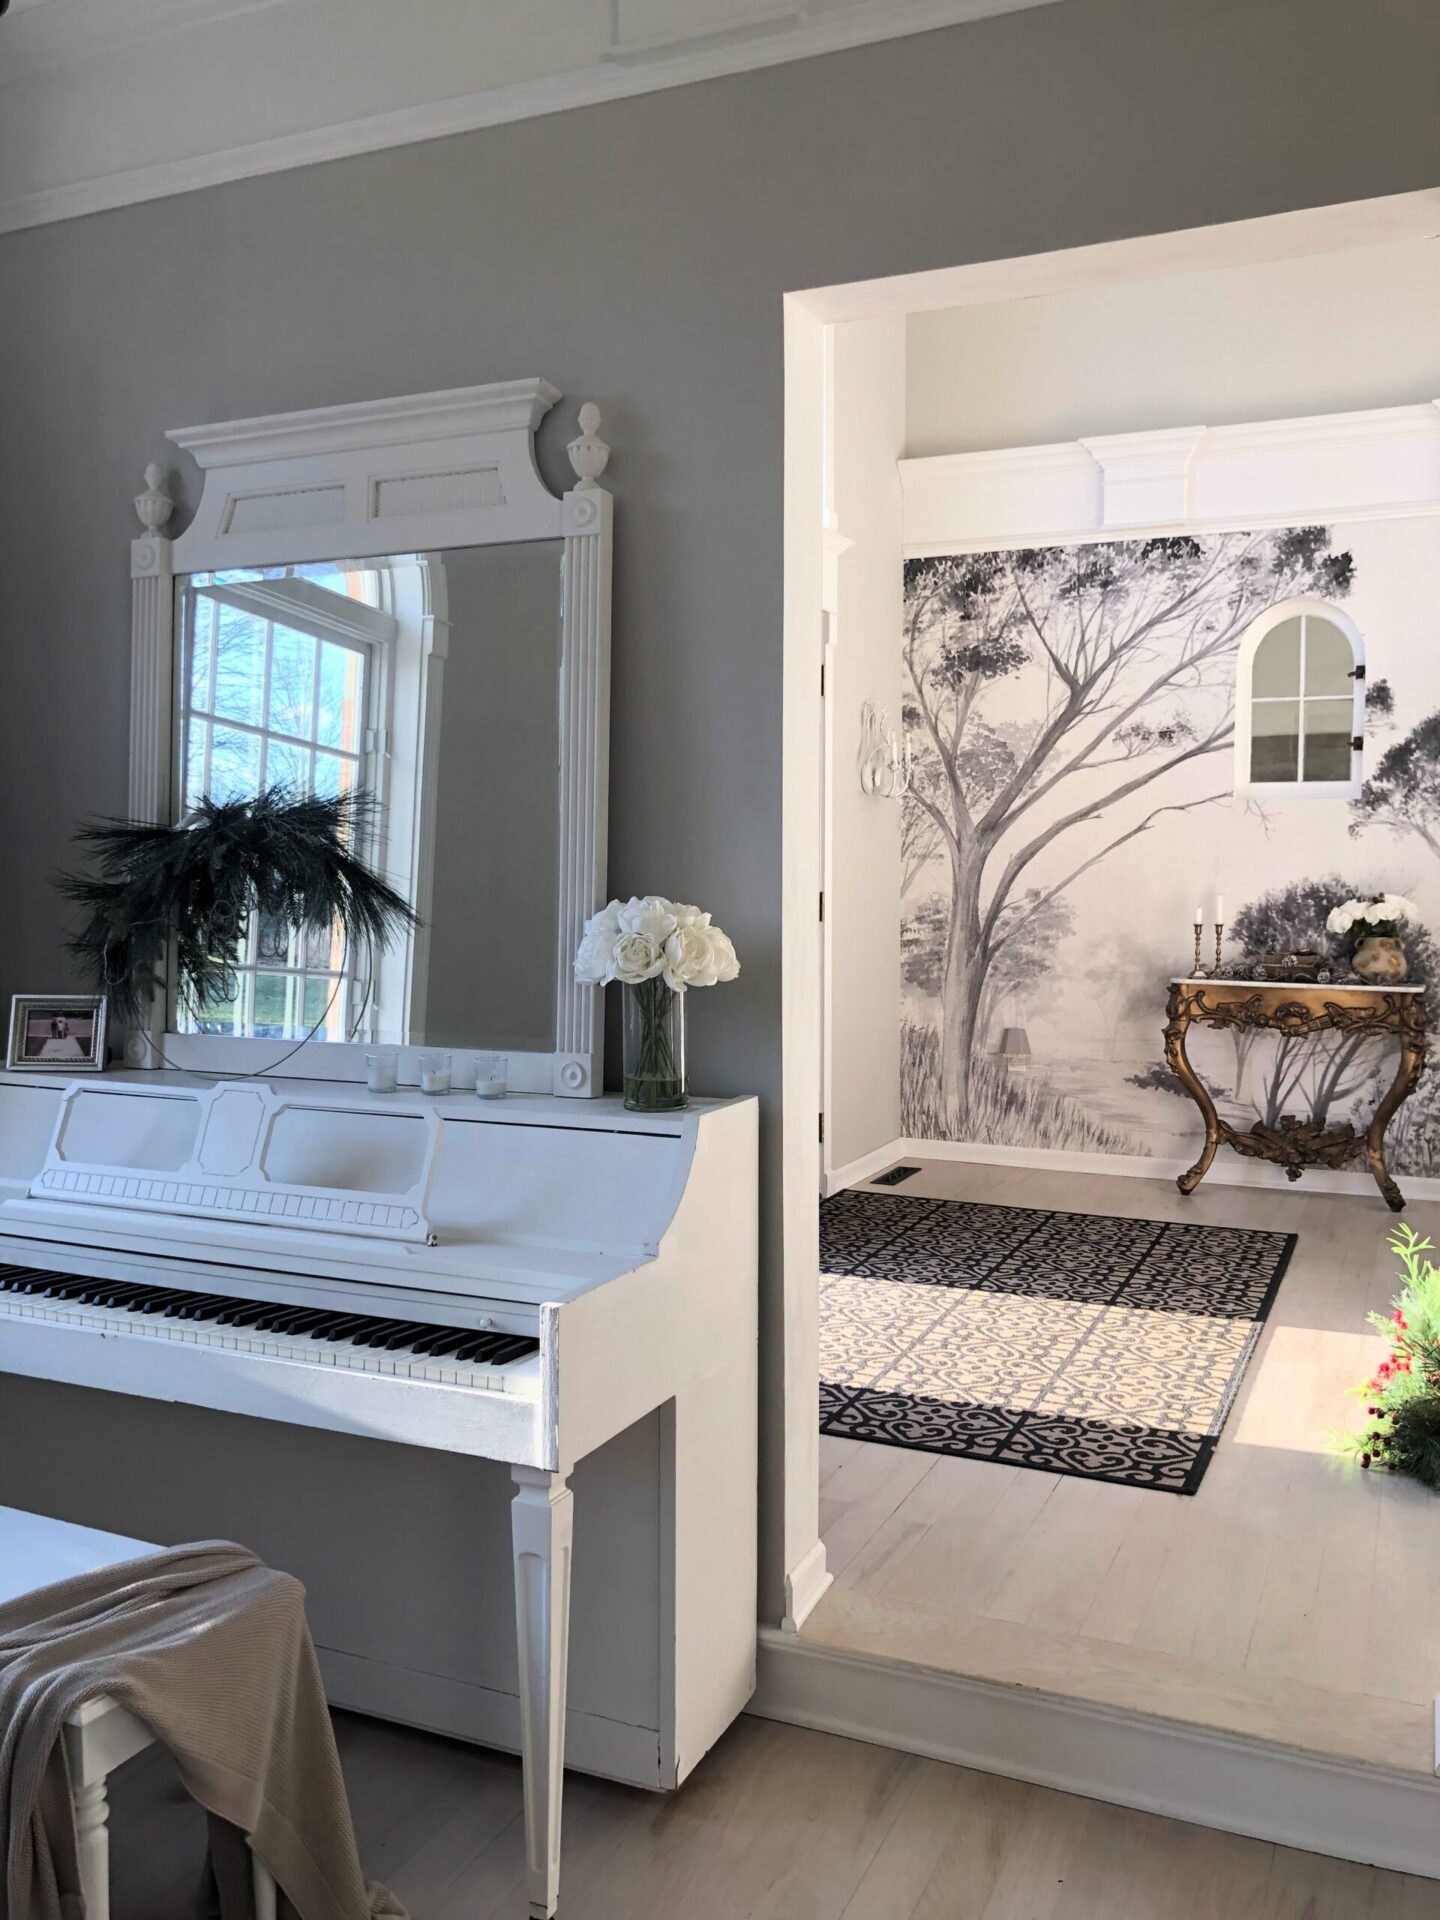 Hello Lovely's holiday foyer with tree mural and modern French serene mood.